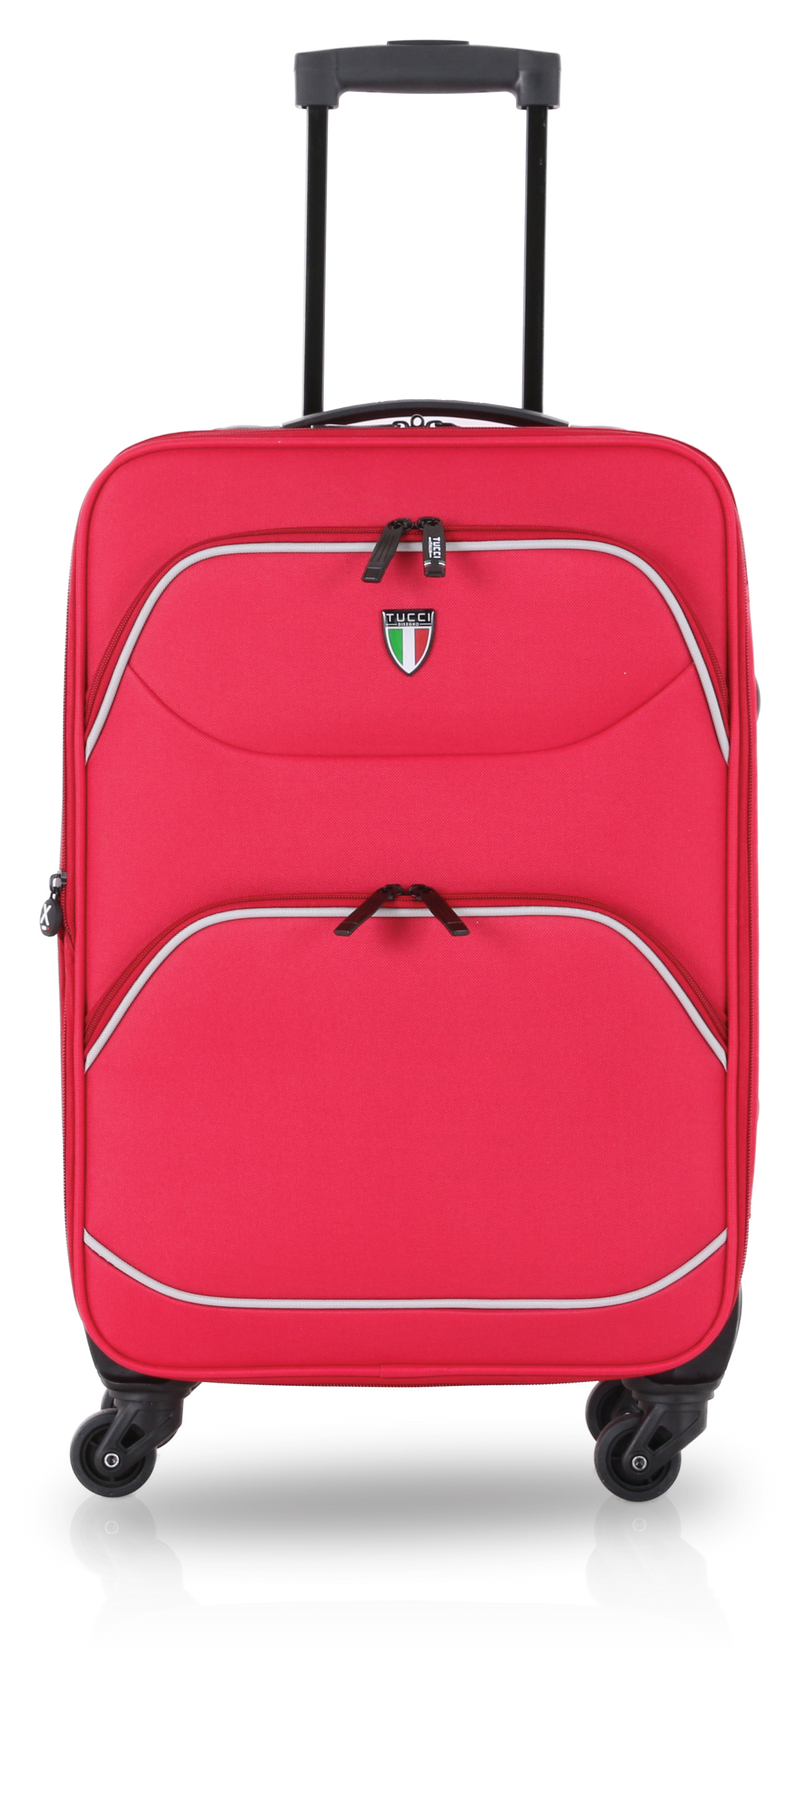 TUCCI Italy BEN FATTO FABRIC 20" Carry On Suitcase